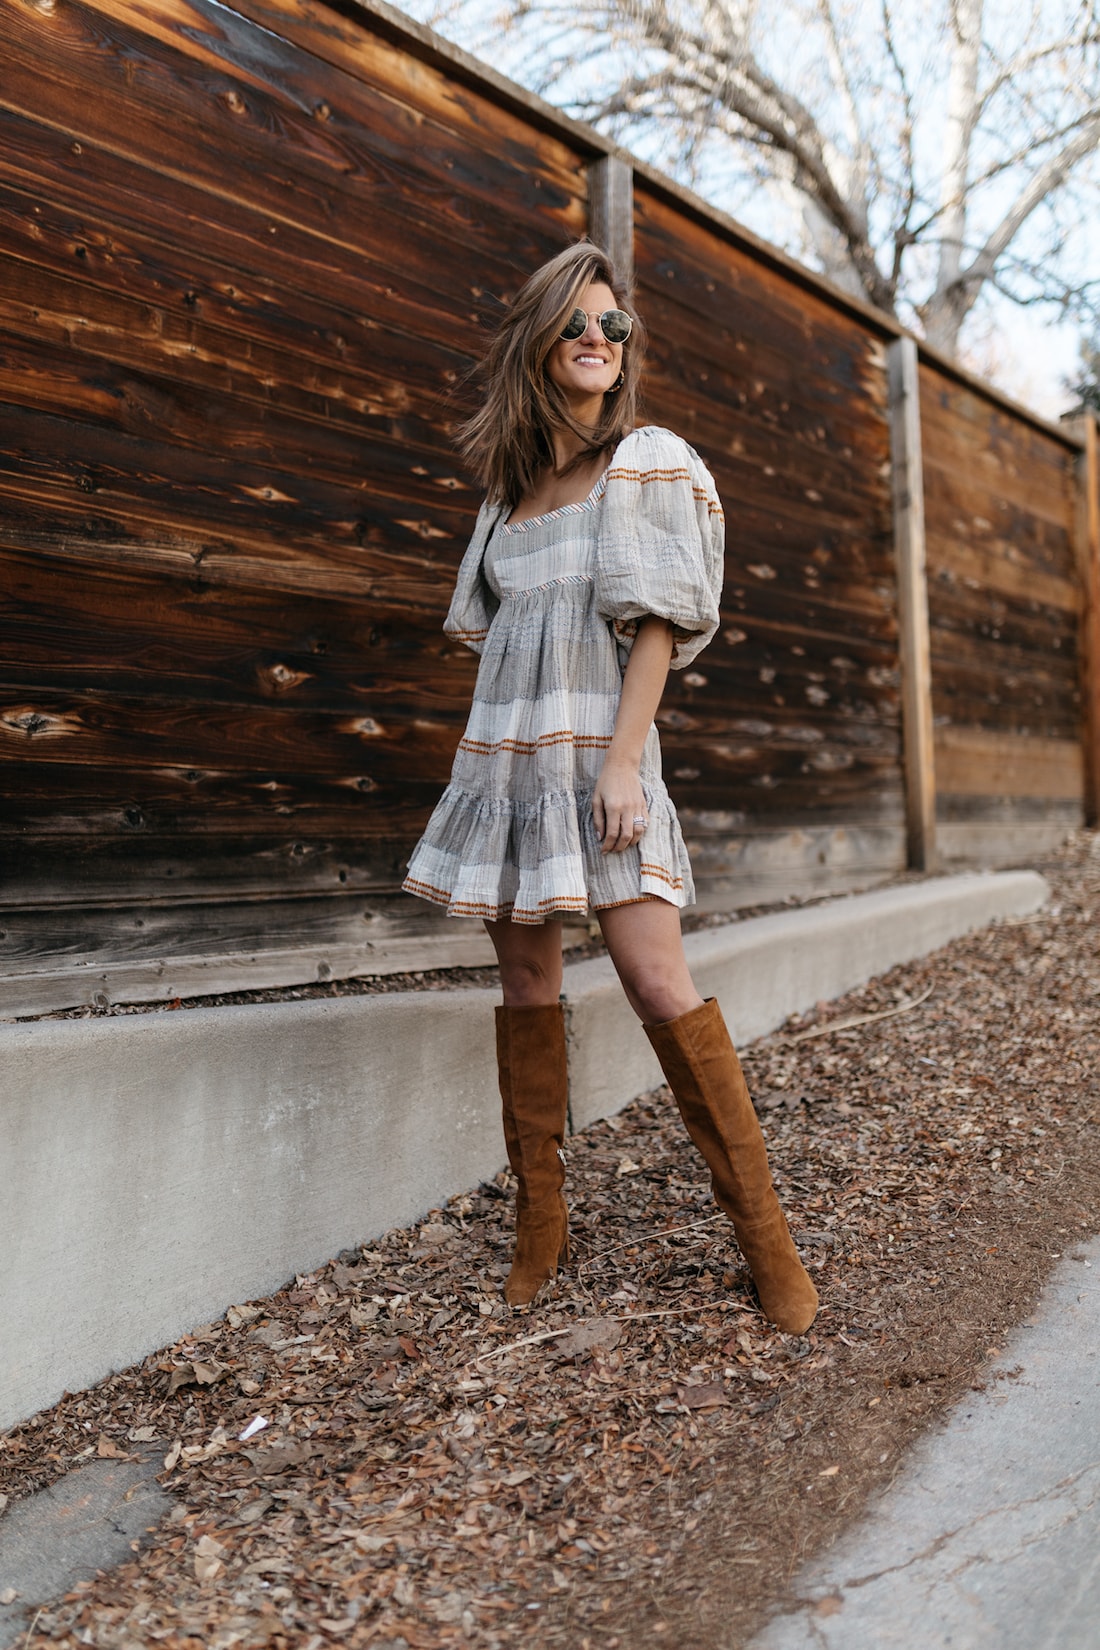 brighton keller wearing free people spring dress puff sleeves from verishop with tall boots